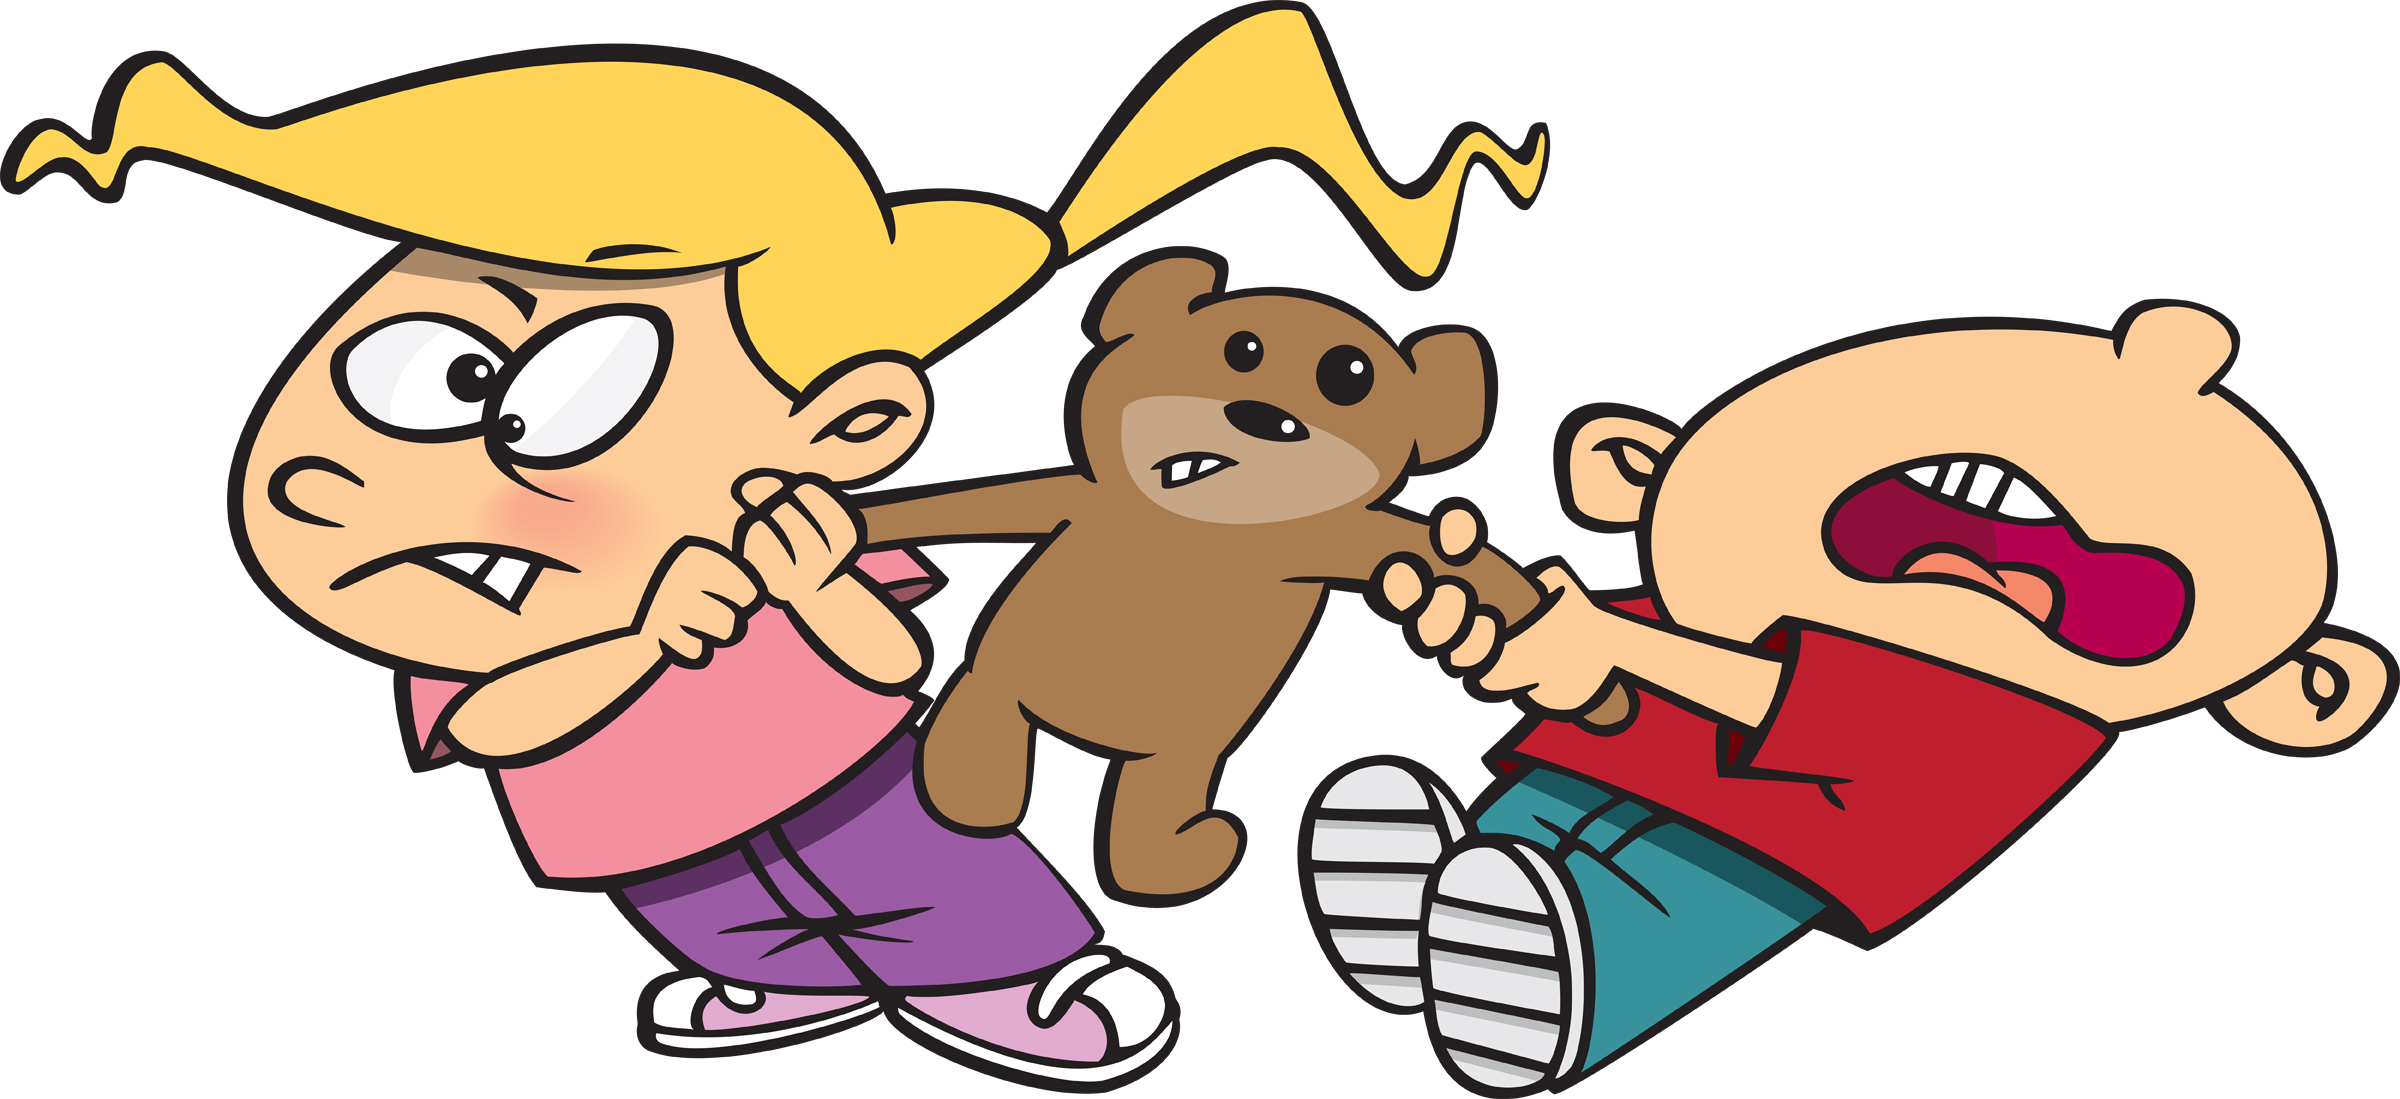 Kids pushing each other clipart